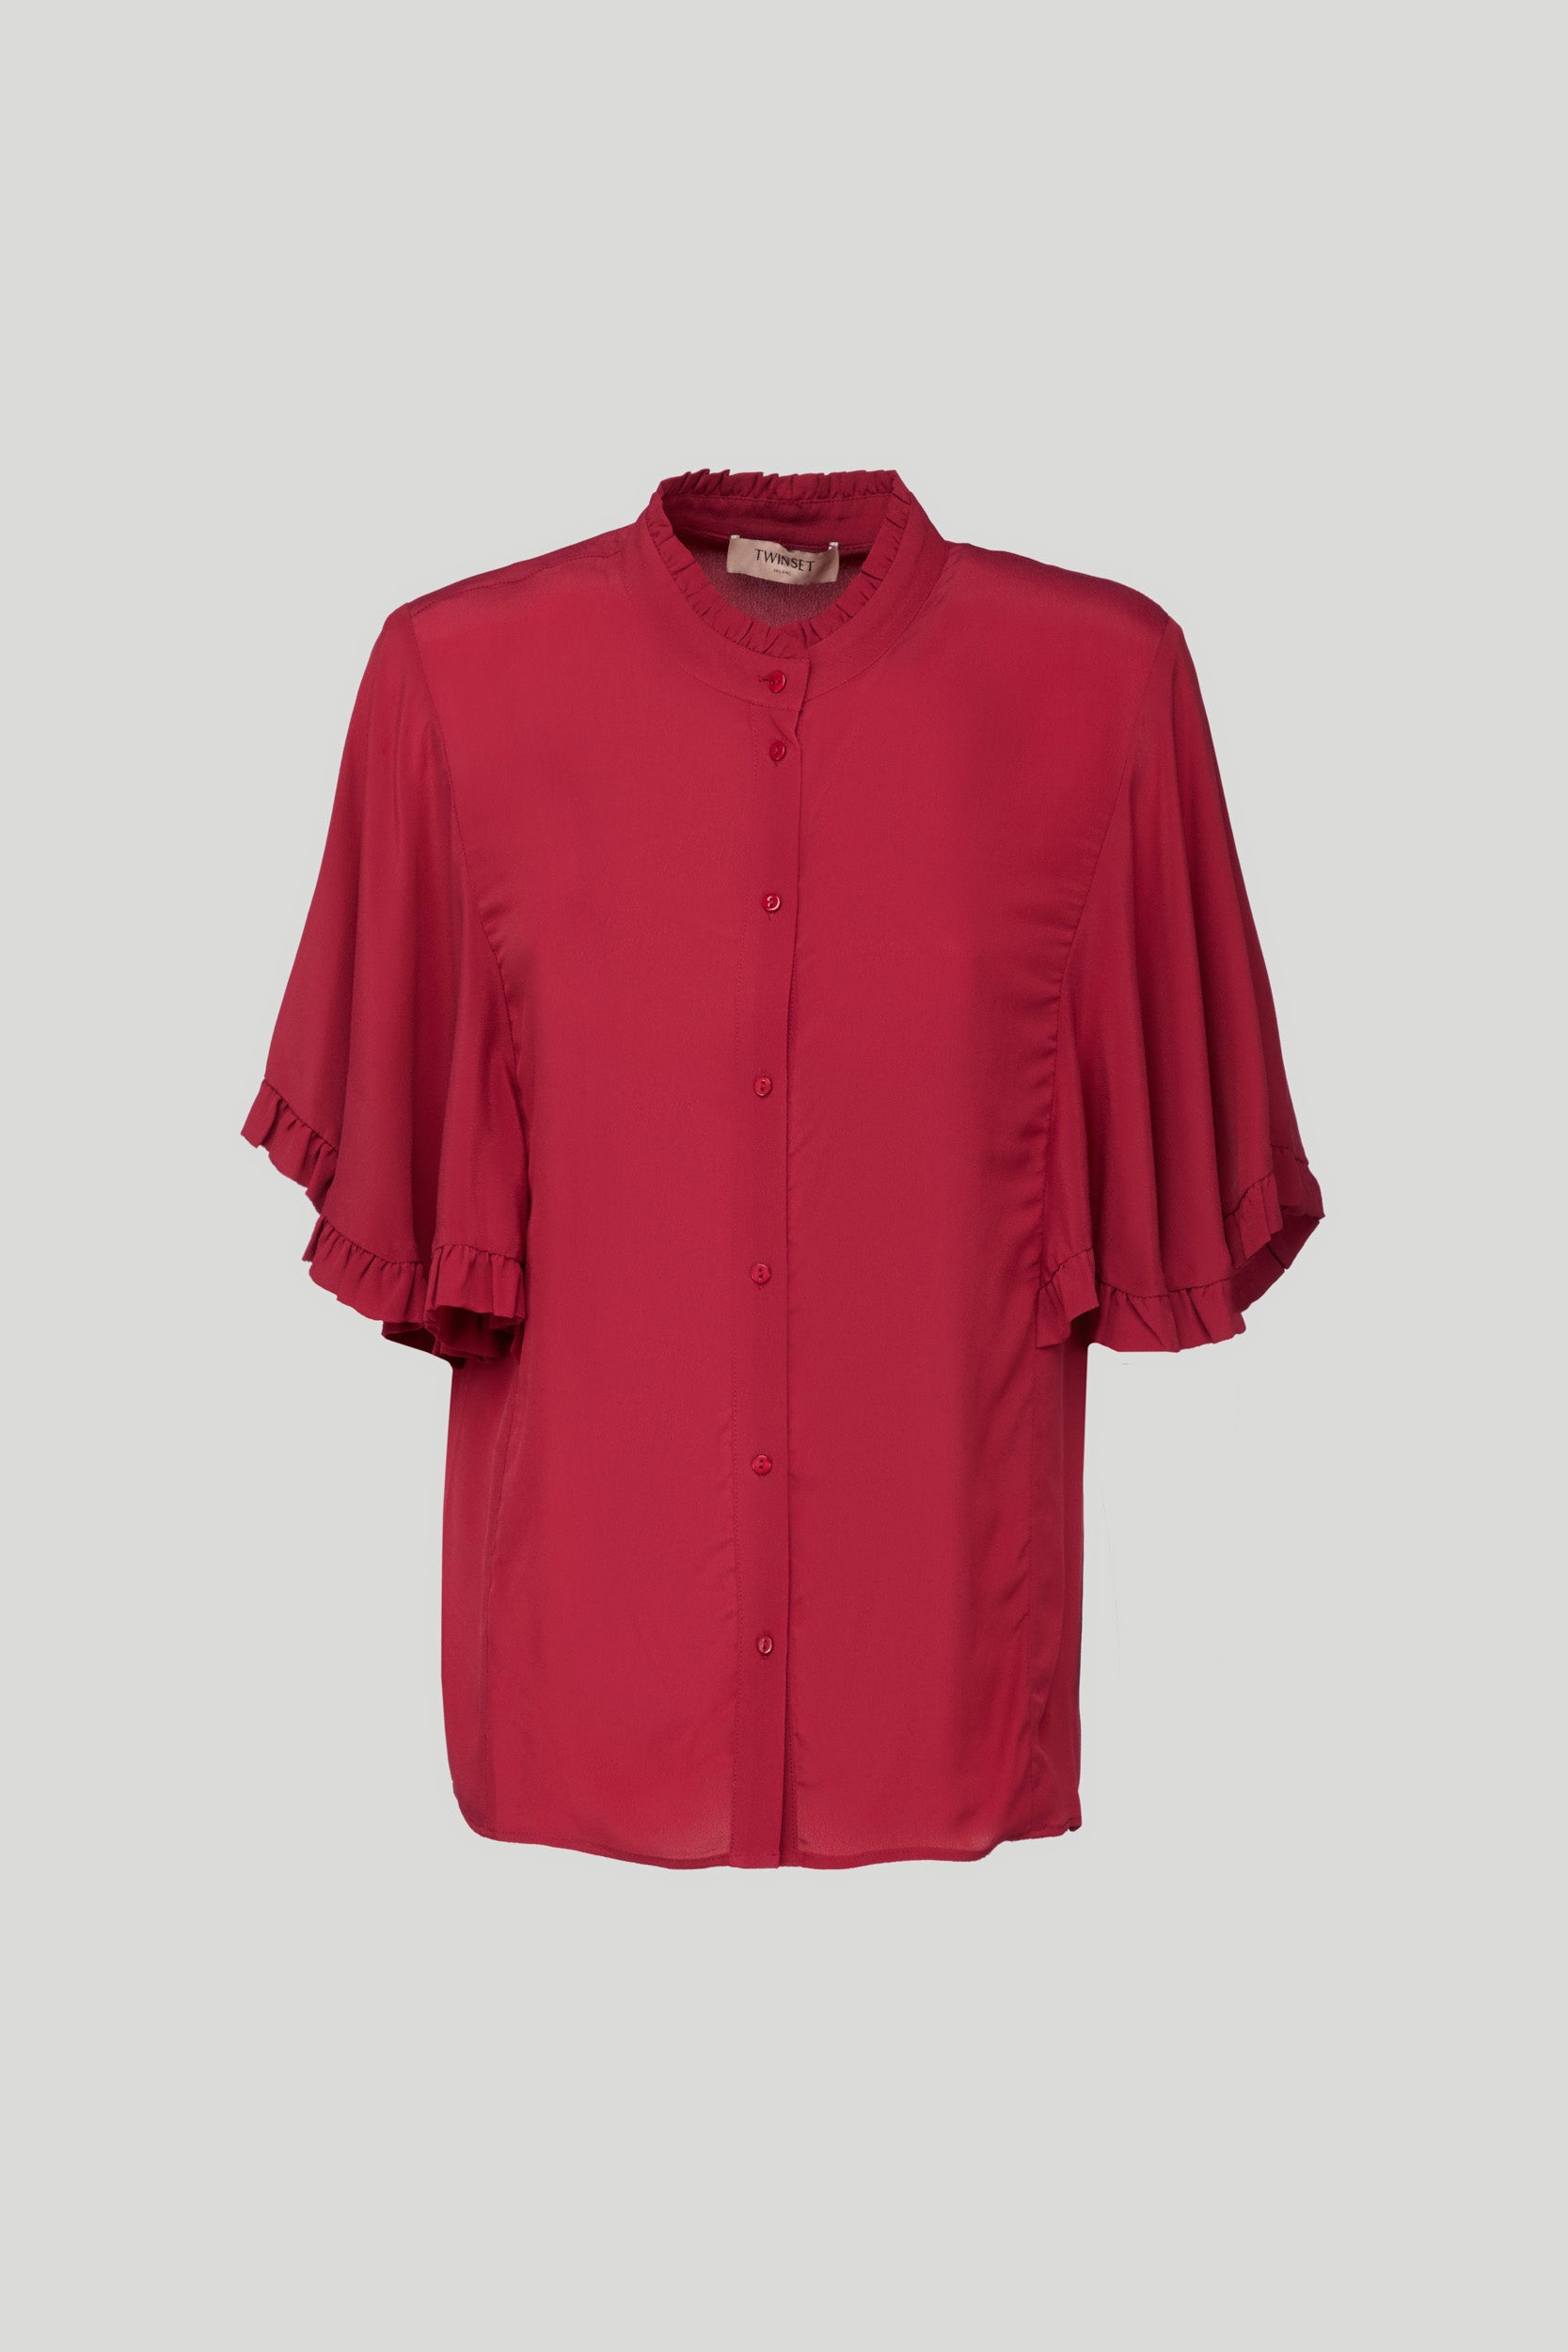 TWINSET Shirt in Red Crepe de Chine